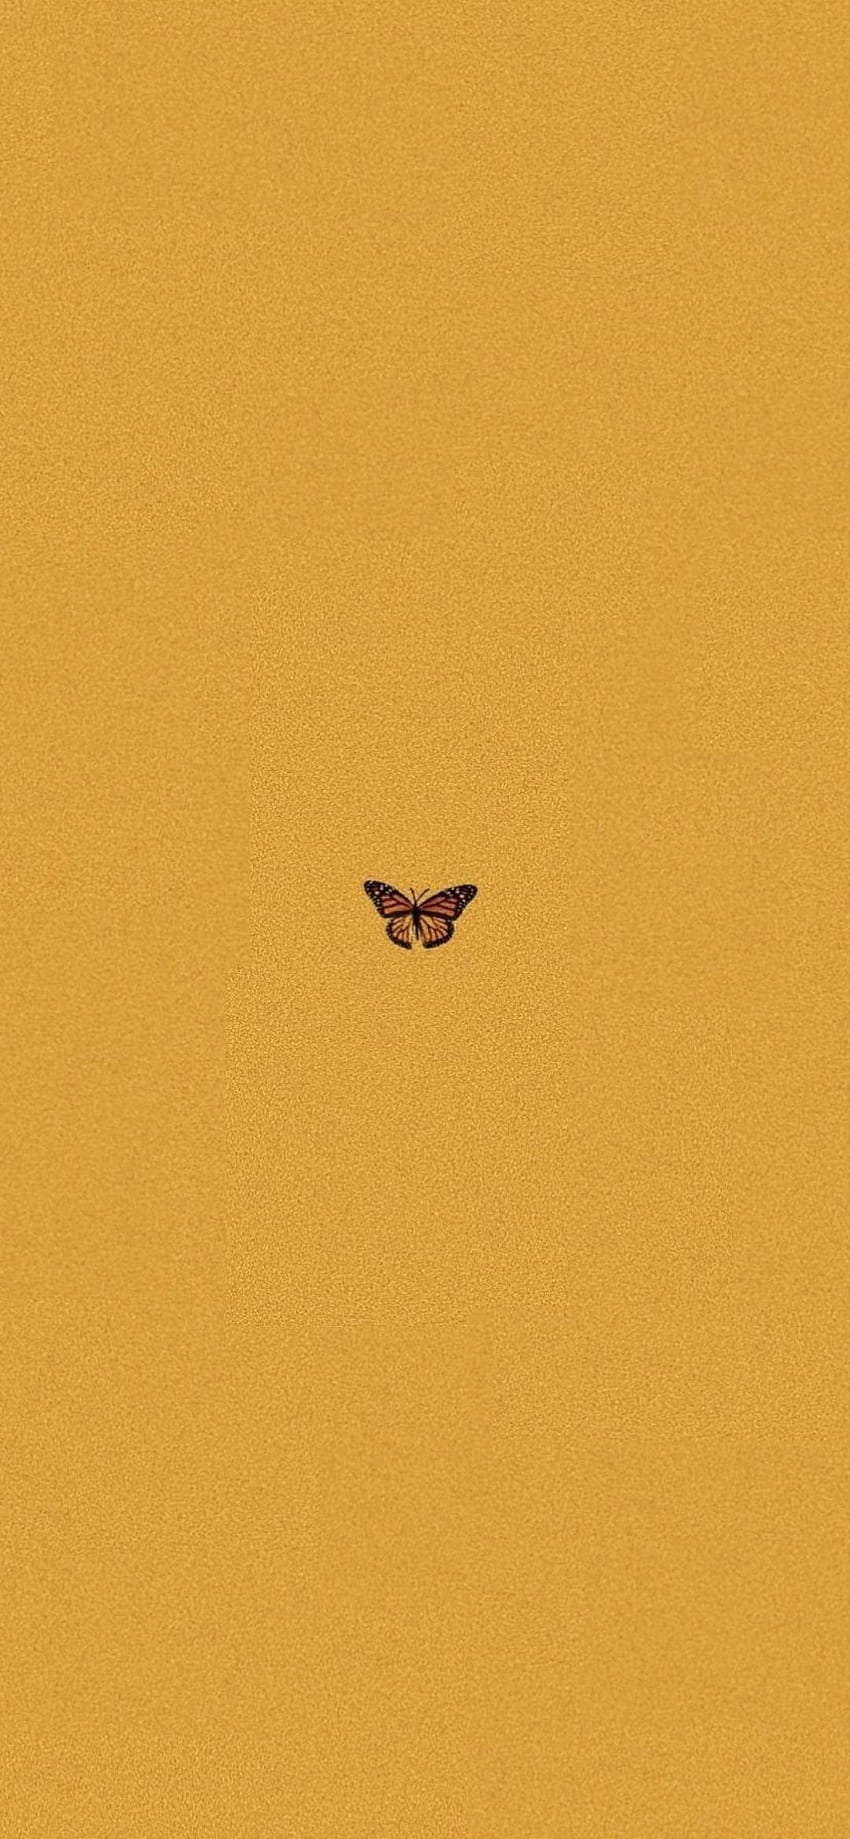 ܓ90 , yellow aesthetic butterfly IPhone X. Ärt in 2019 - Android / iPhone Background (png / jpg) (2021), Yellow Butterflies iPhone HD phone wallpaper